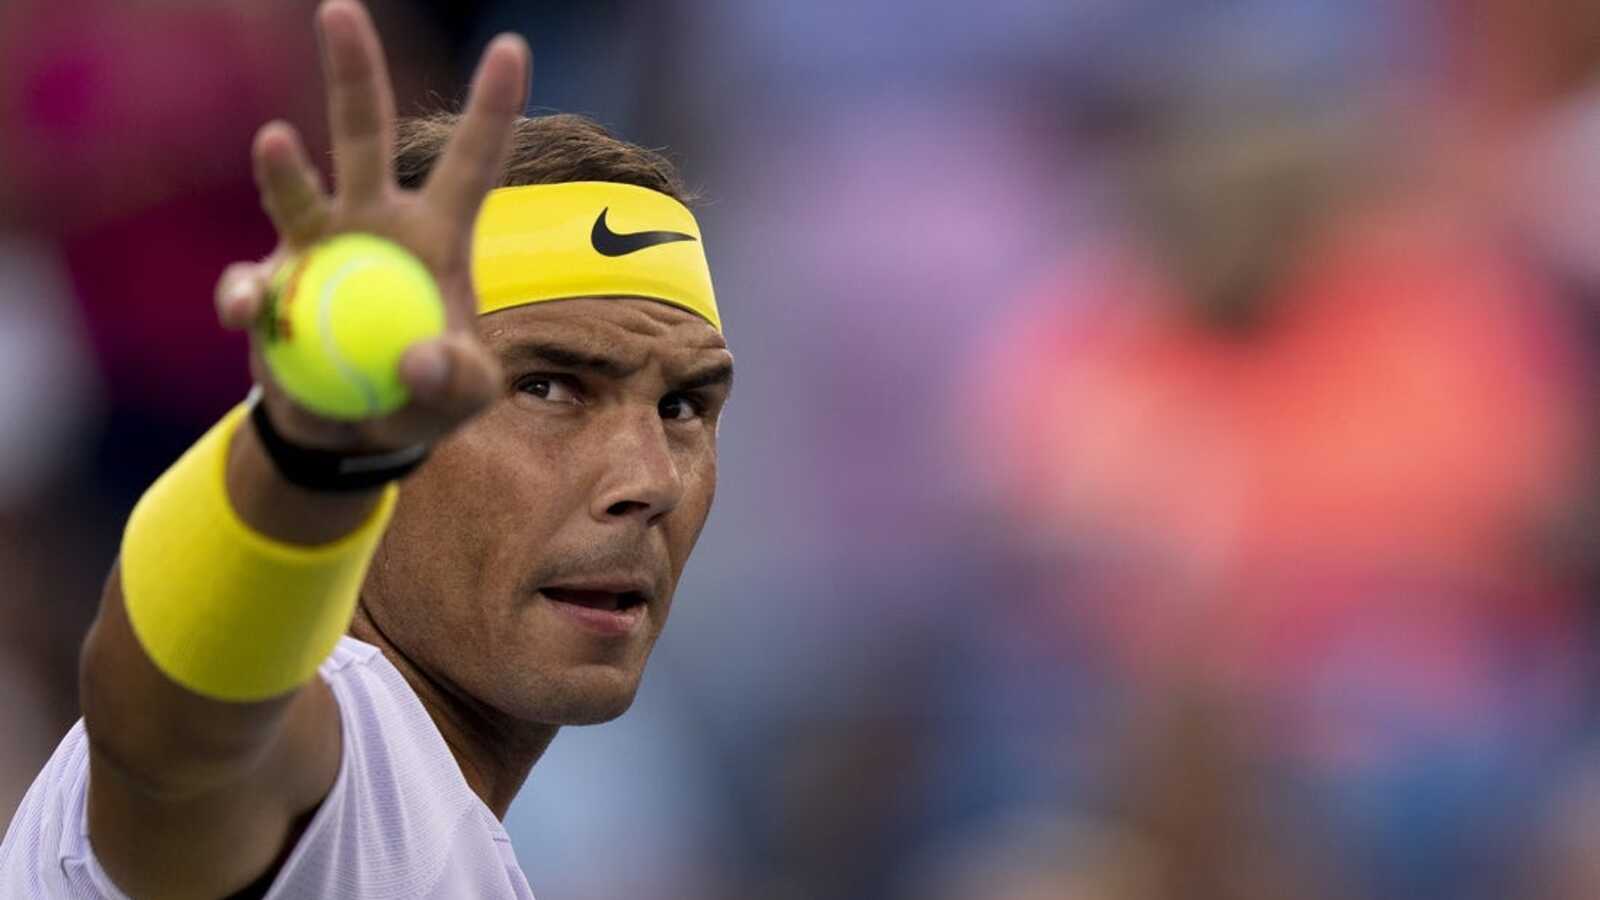 Rafael Nadal drops out of Indian Wells, says he ‘can’t lie’ to fans, self